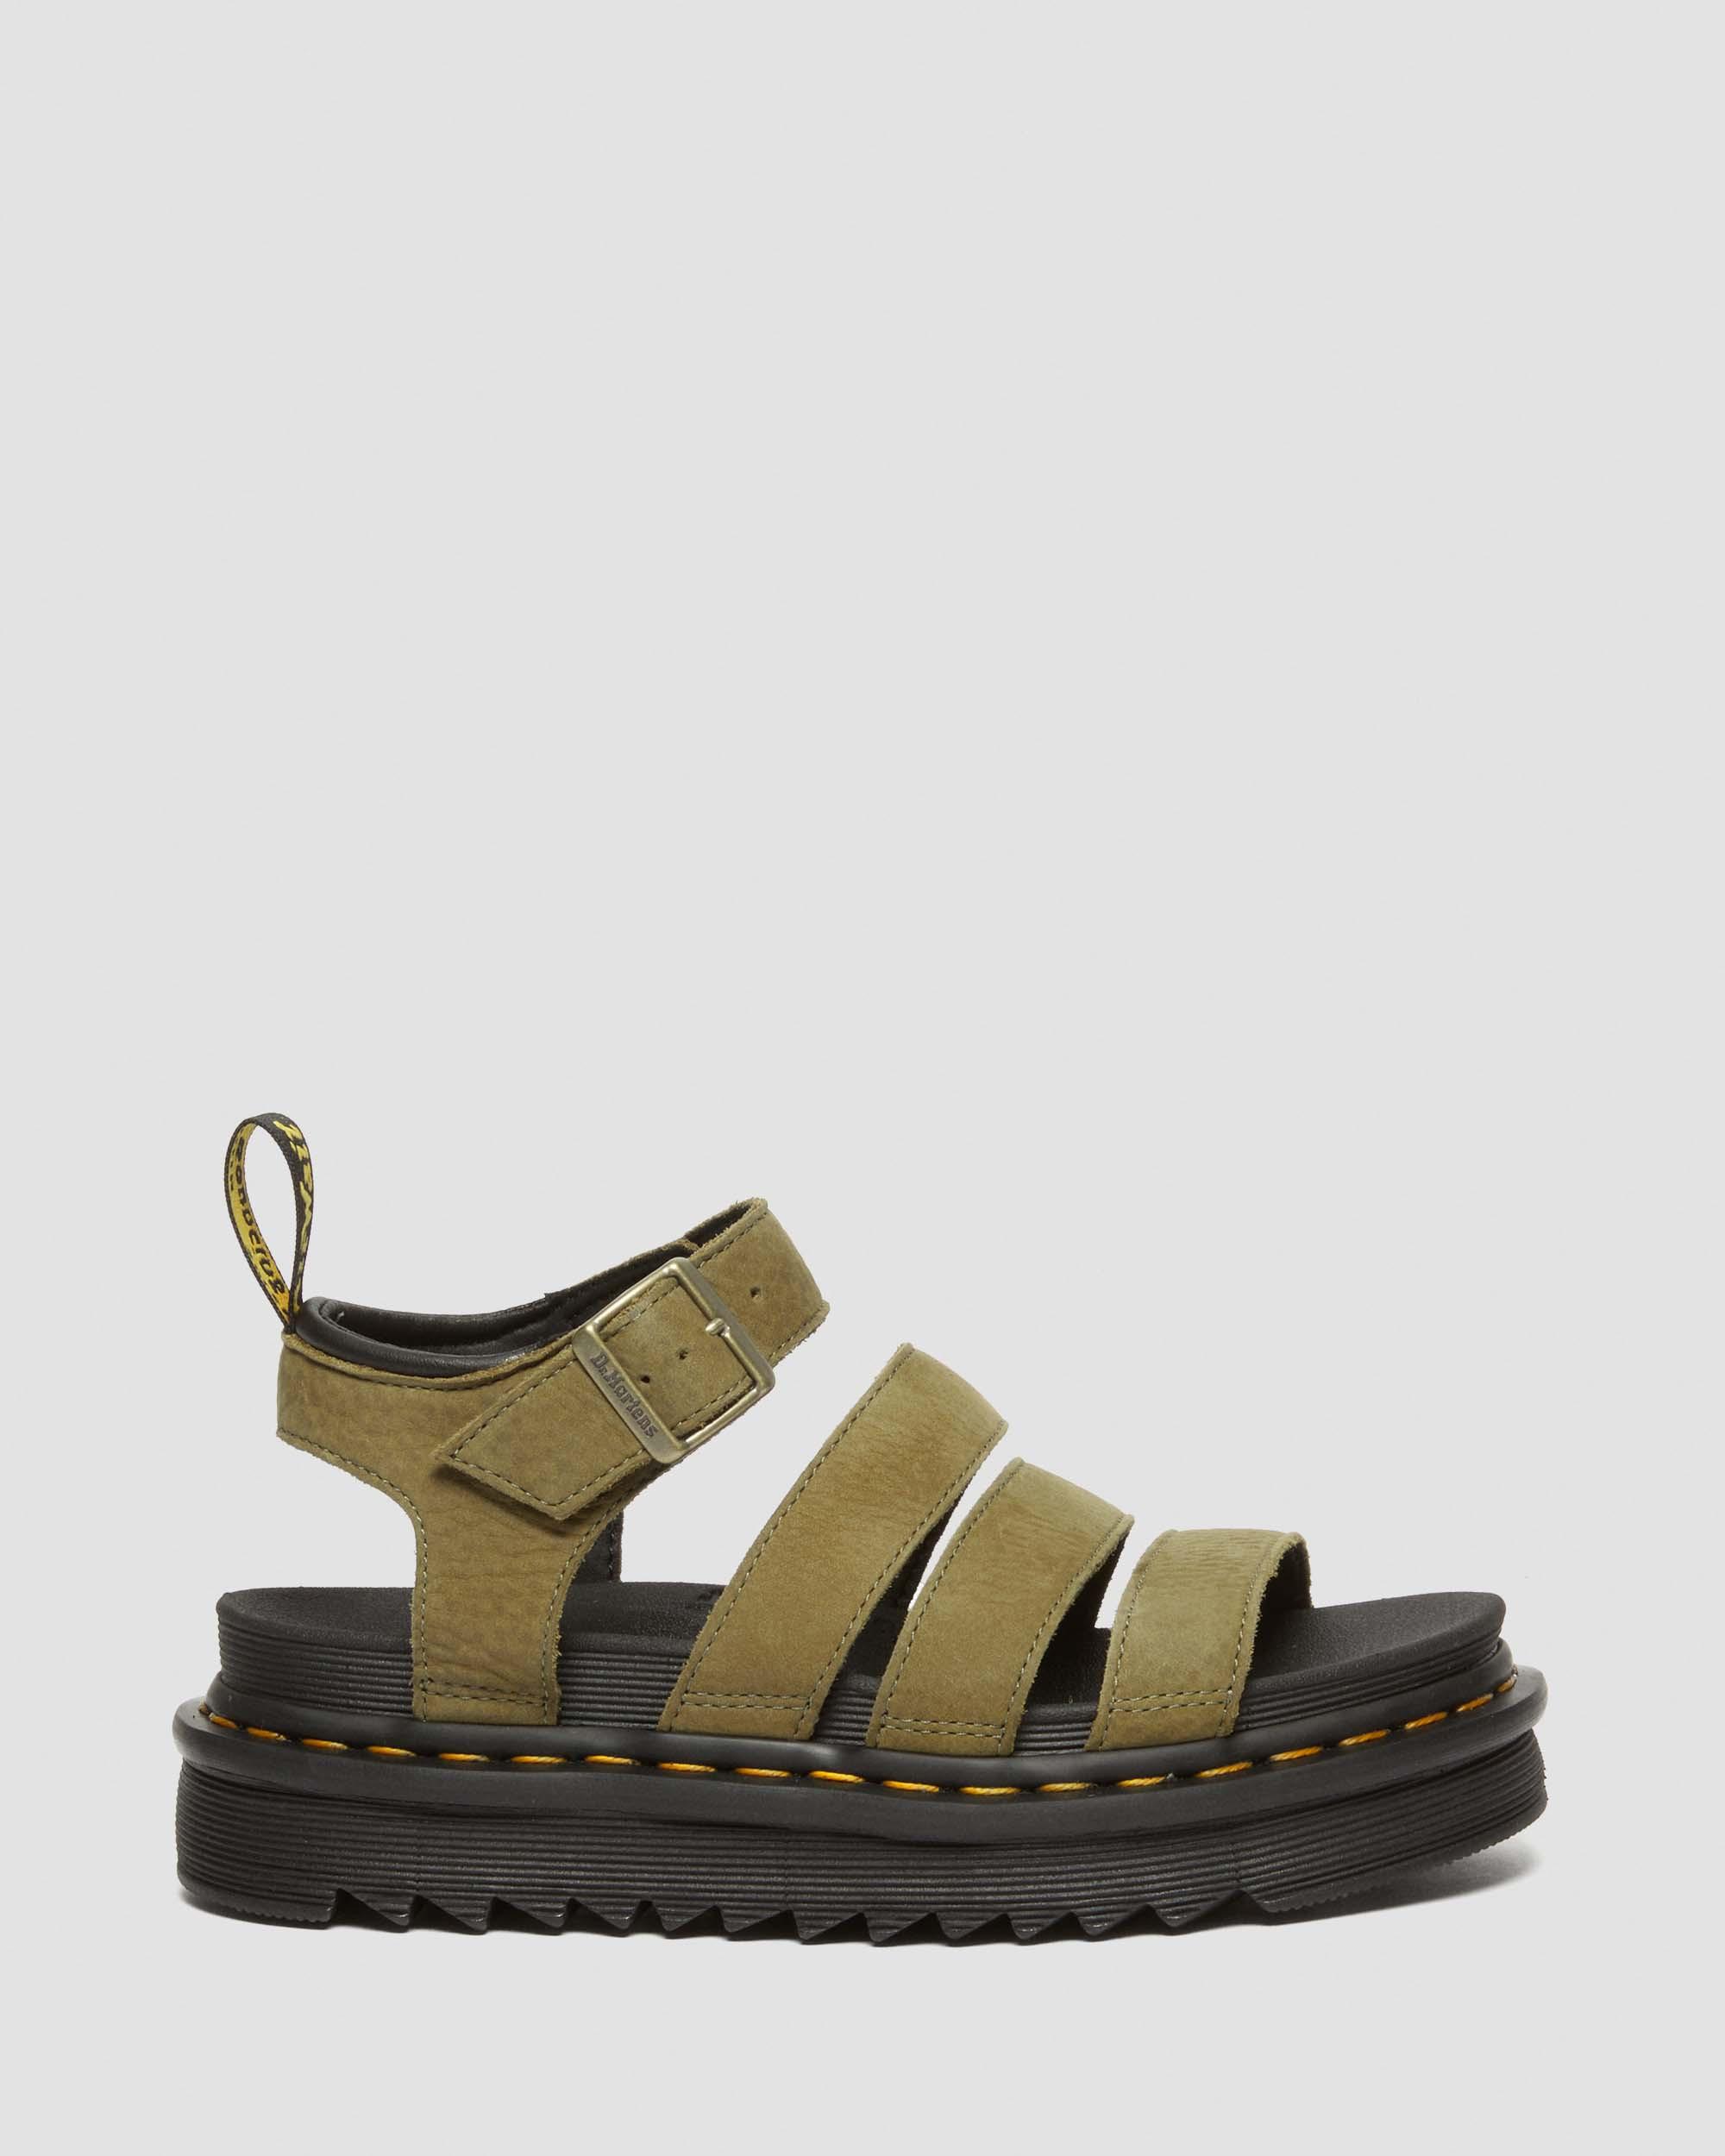 Blaire Tumbled Nubuck Leather Sandals in Muted Olive